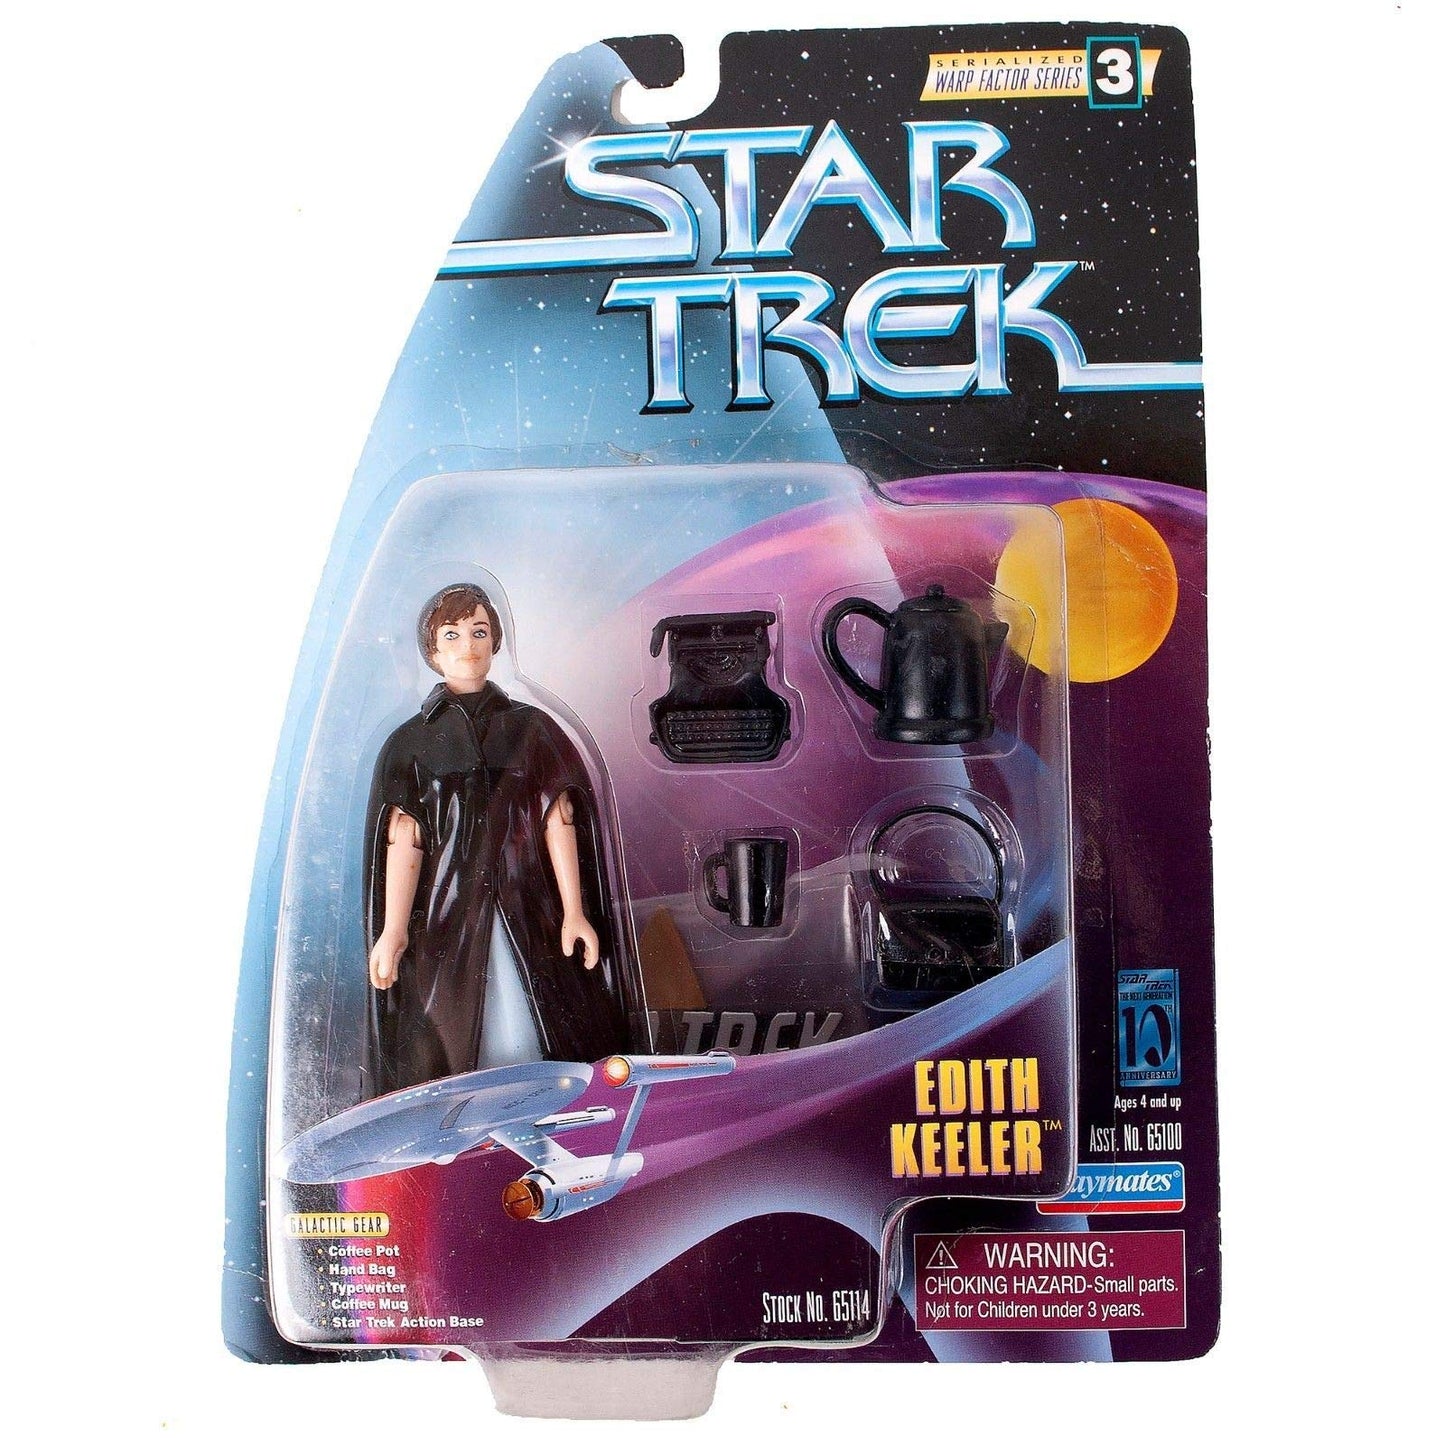 Vintage 1997 Star Trek Warp Factor Series 3 Edith Keeler Action Figure from Star Trek The Original Series Episode The City On The Edge Of Forever - Brand New Factory Sealed Shop Stock Room Find